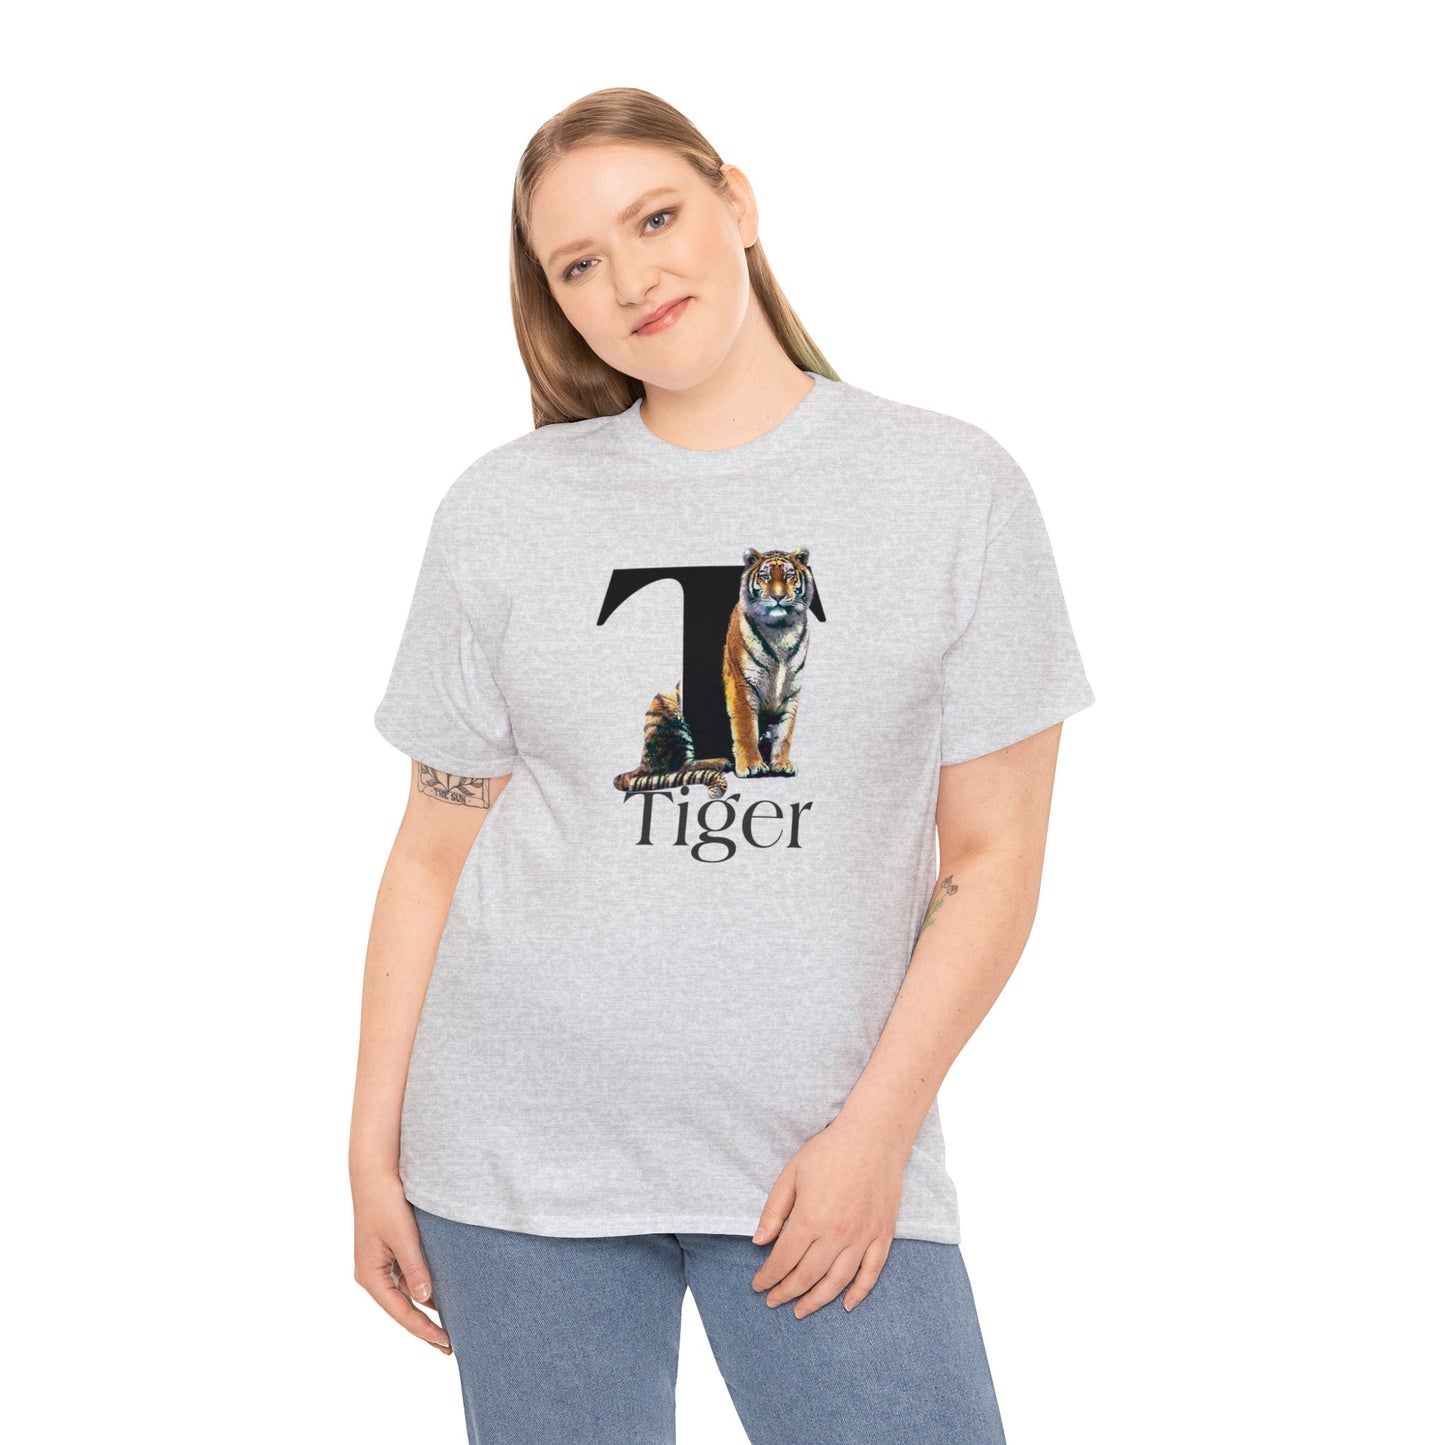 T is for Tiger Adult T-Shirt, Terrific Tiger Tee, Tiger Drawing T-Shirt, Tiger Illustration t-shirt,